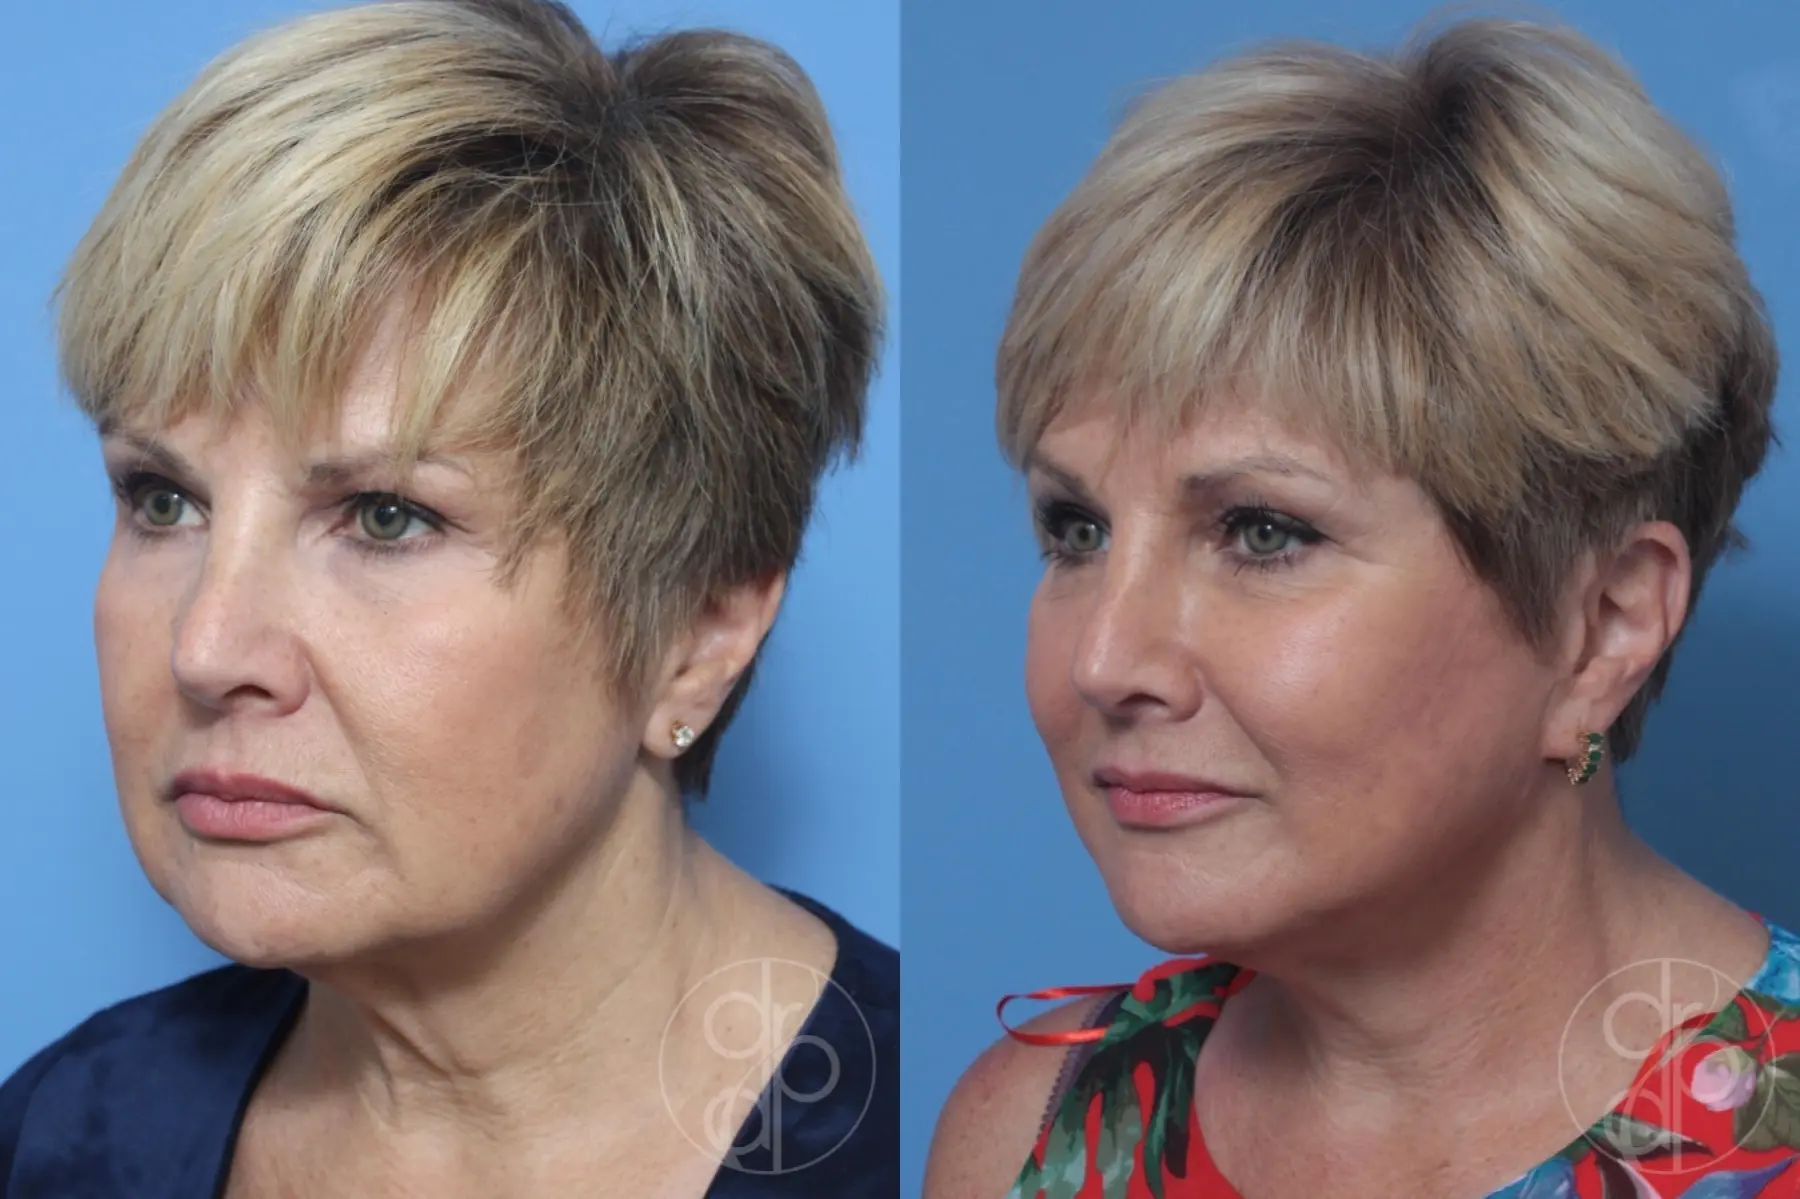 patient 10611 neck lift before and after result - Before and After 3